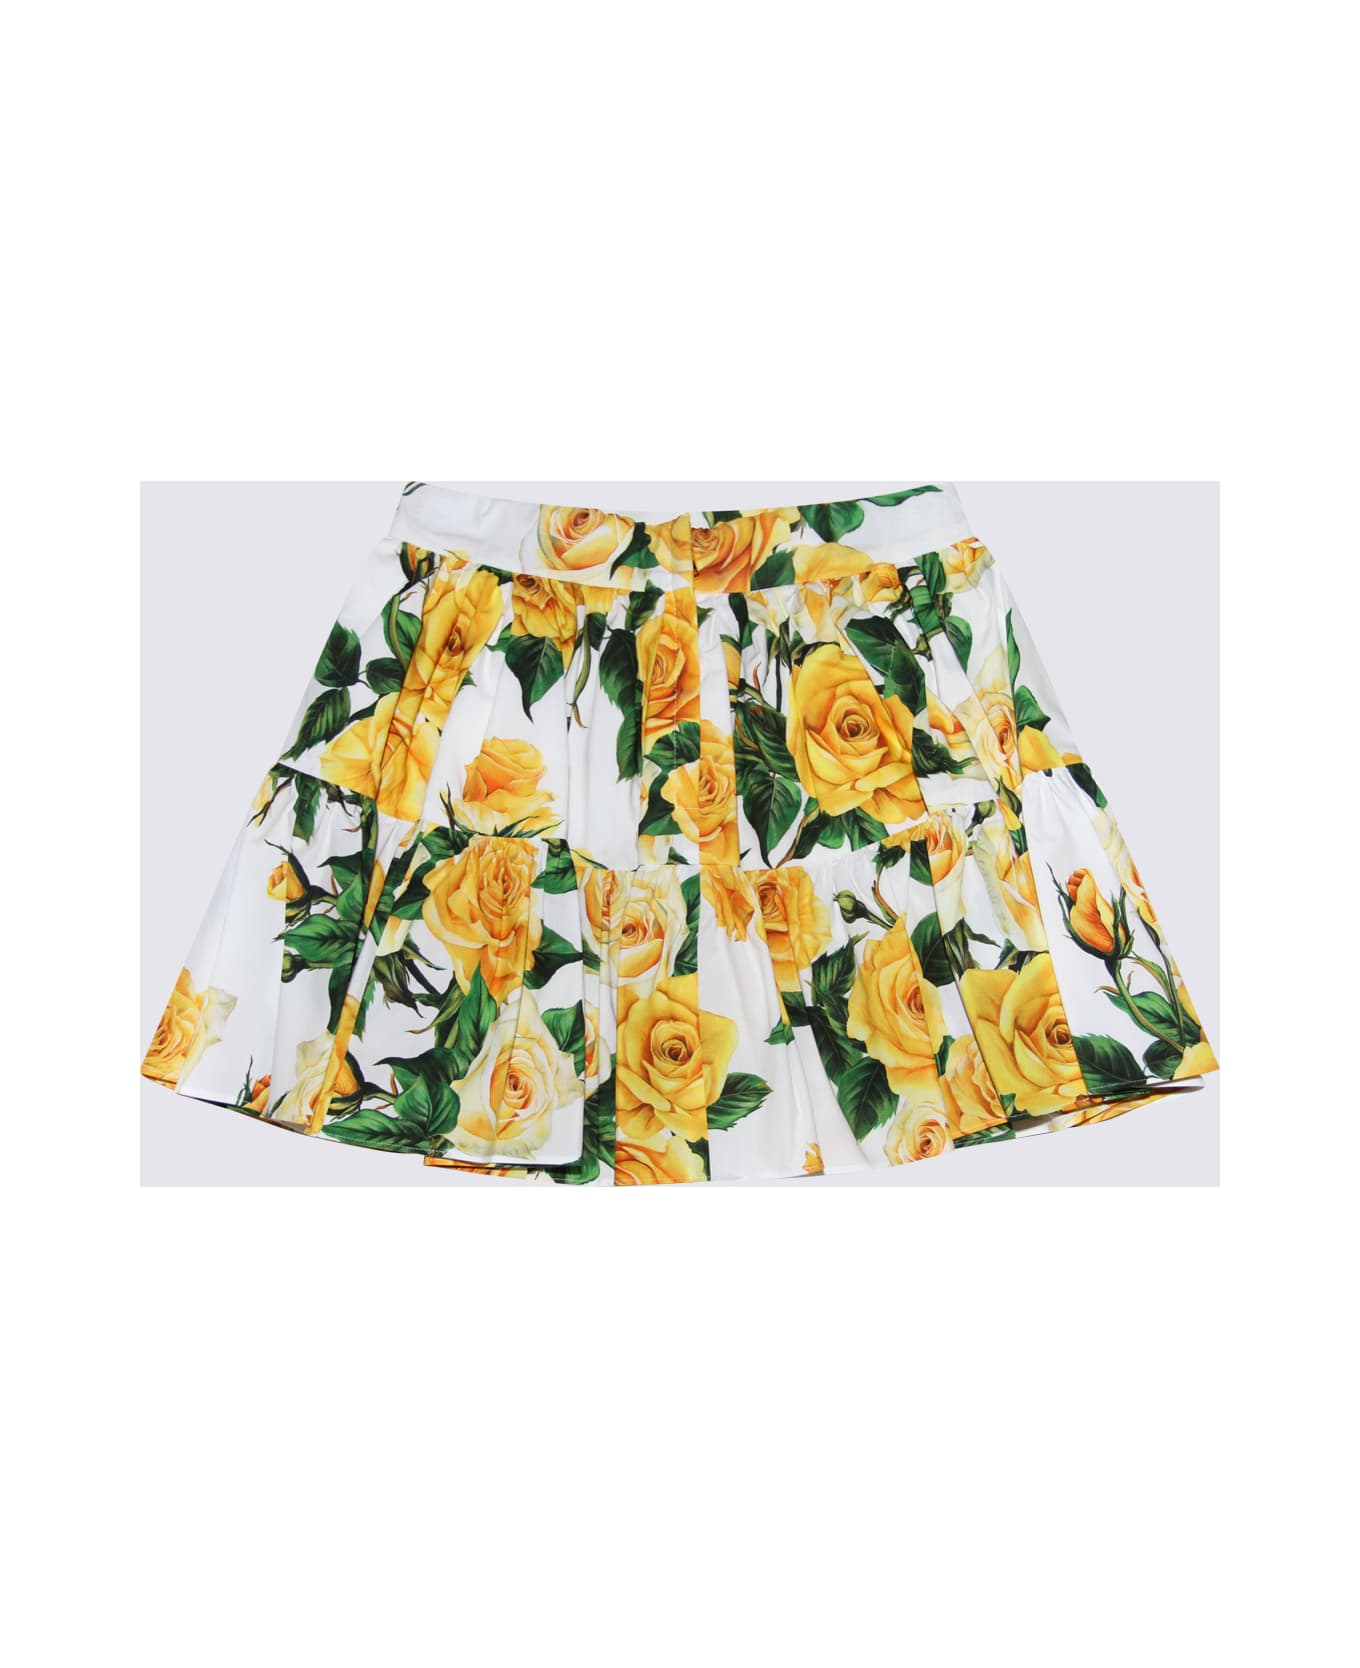 Dolce & Gabbana White, Yellow And Green Cotton Skirt - ROSE GIALLE F.DO BIANCO